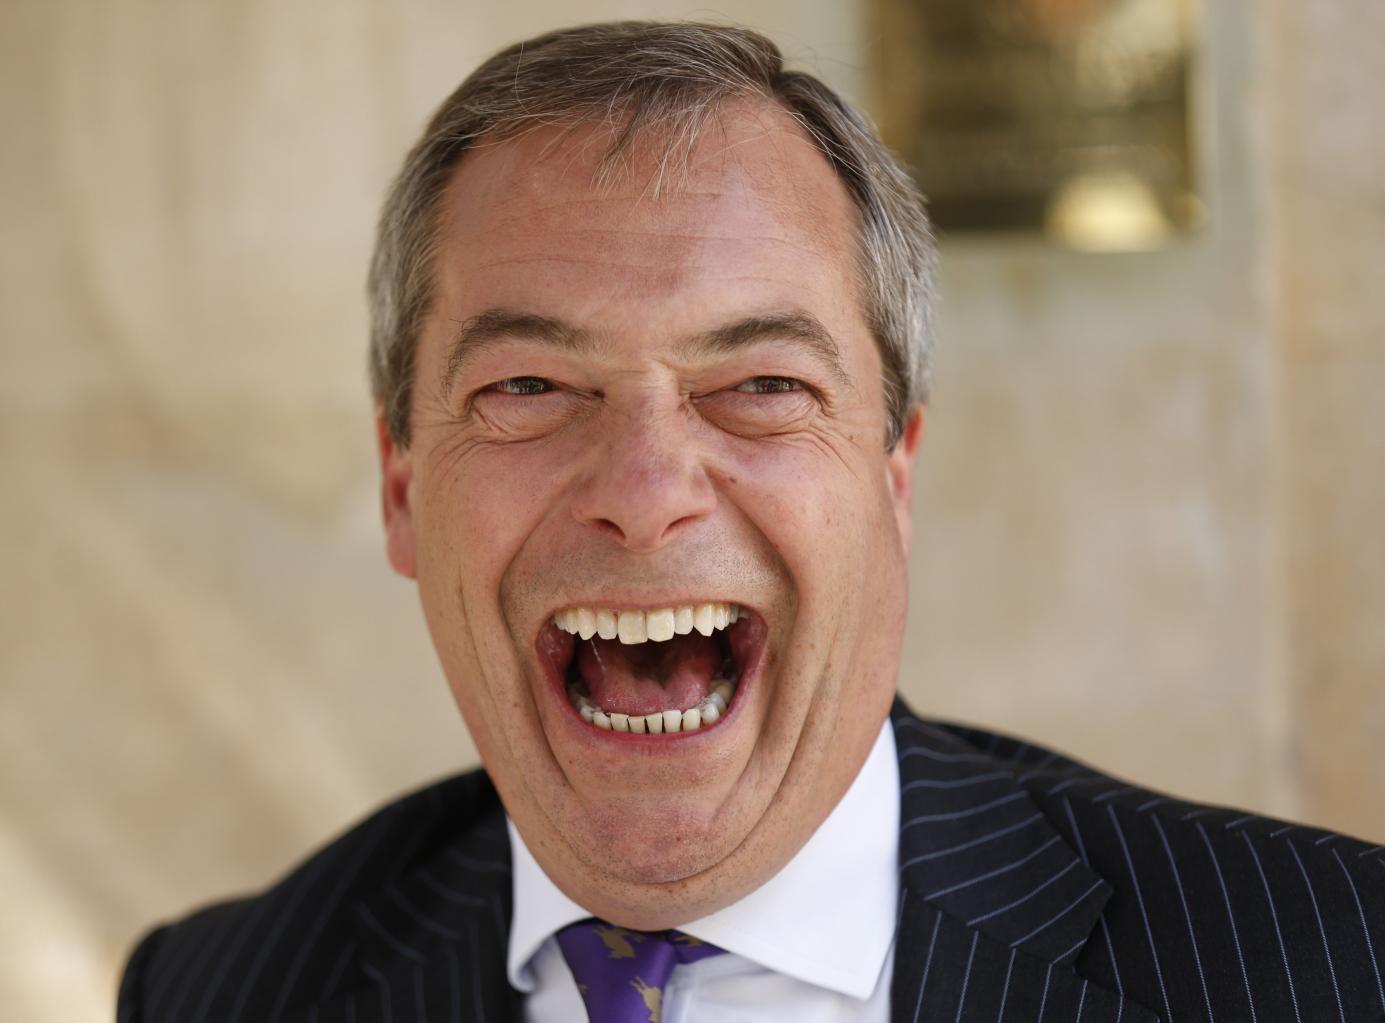 Furious Nigel Farage To Take Control Of Britain's Exit From The EU